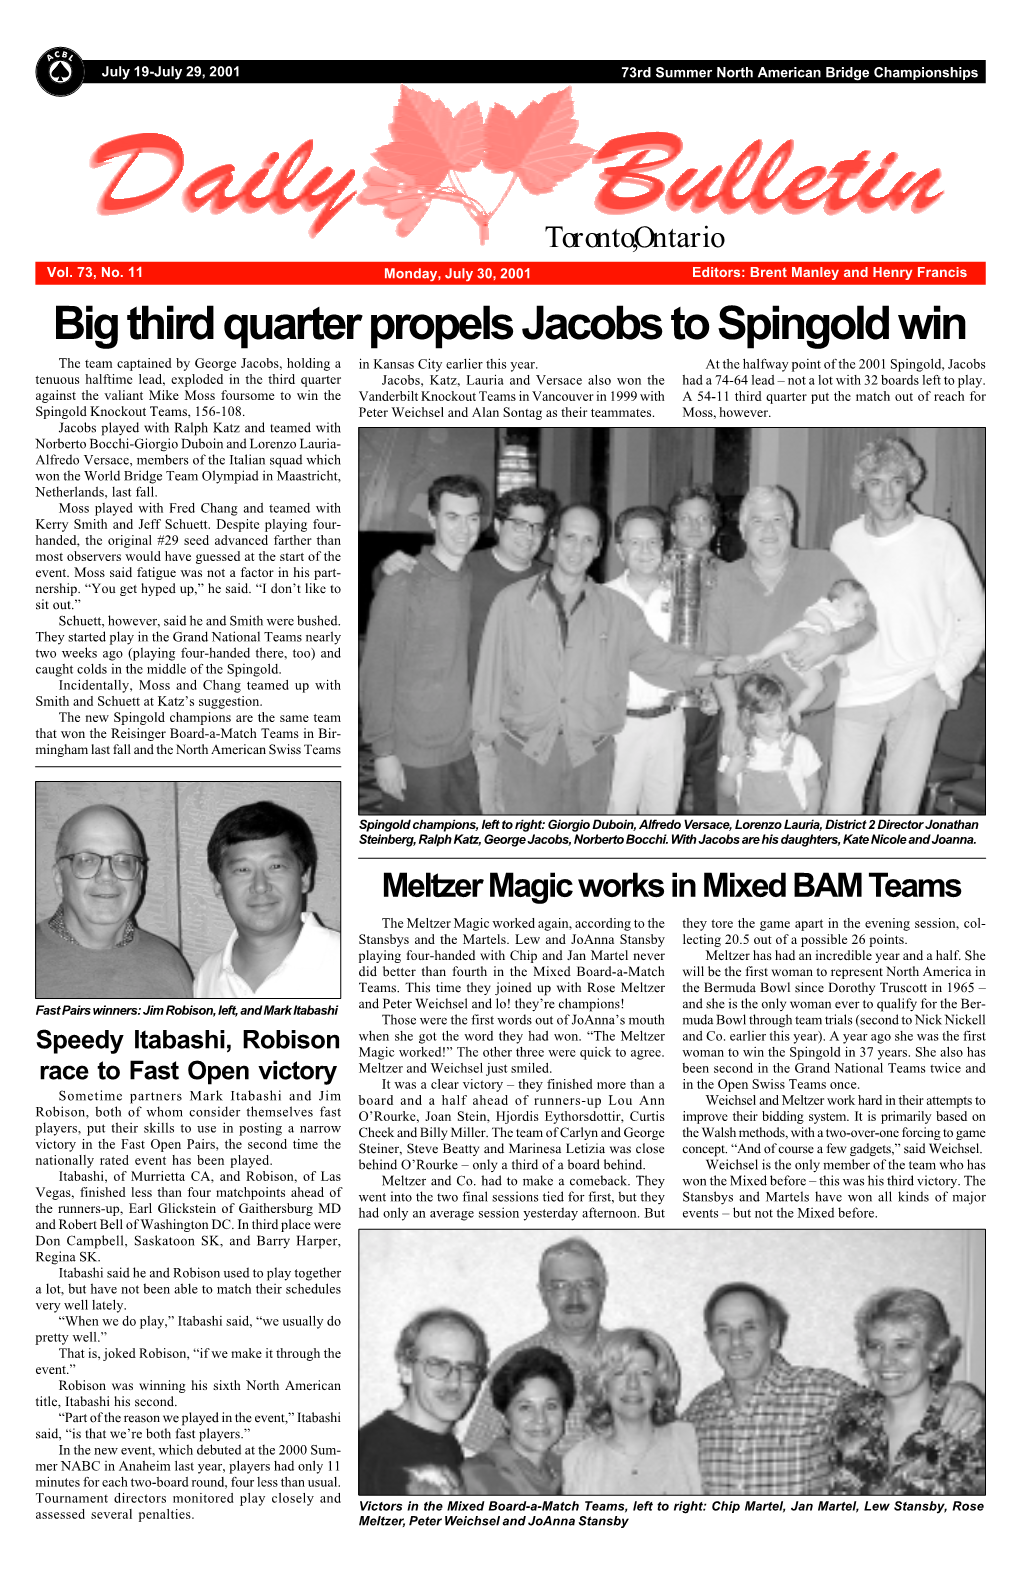 Big Third Quarter Propels Jacobs to Spingold Win the Team Captained by George Jacobs, Holding a in Kansas City Earlier This Year